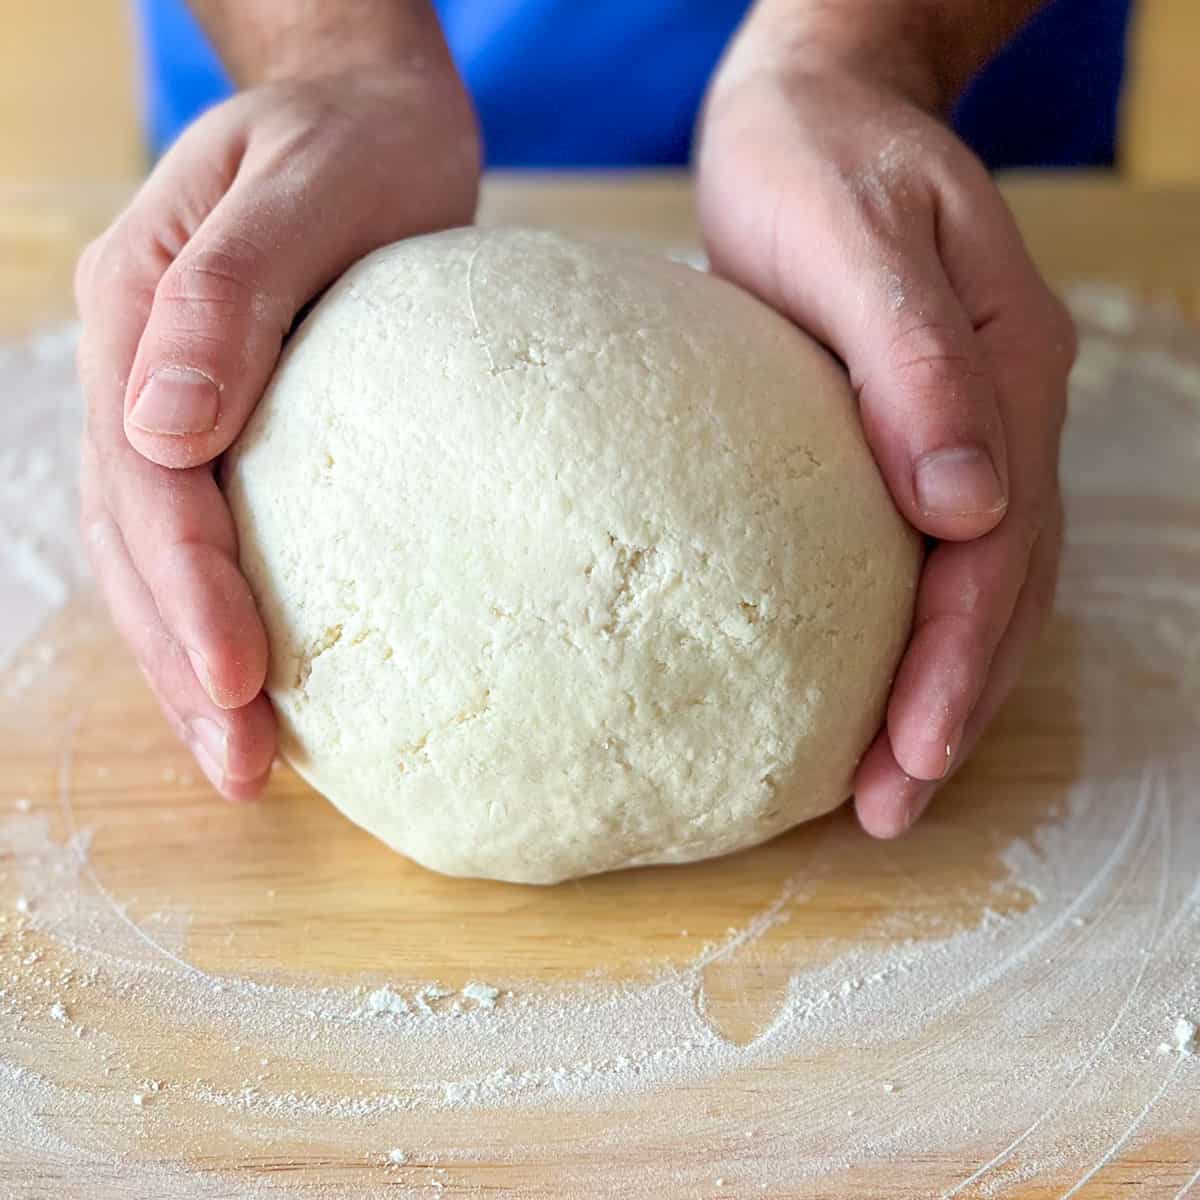 Two hands holding a ball of dough on a wooden cutting board